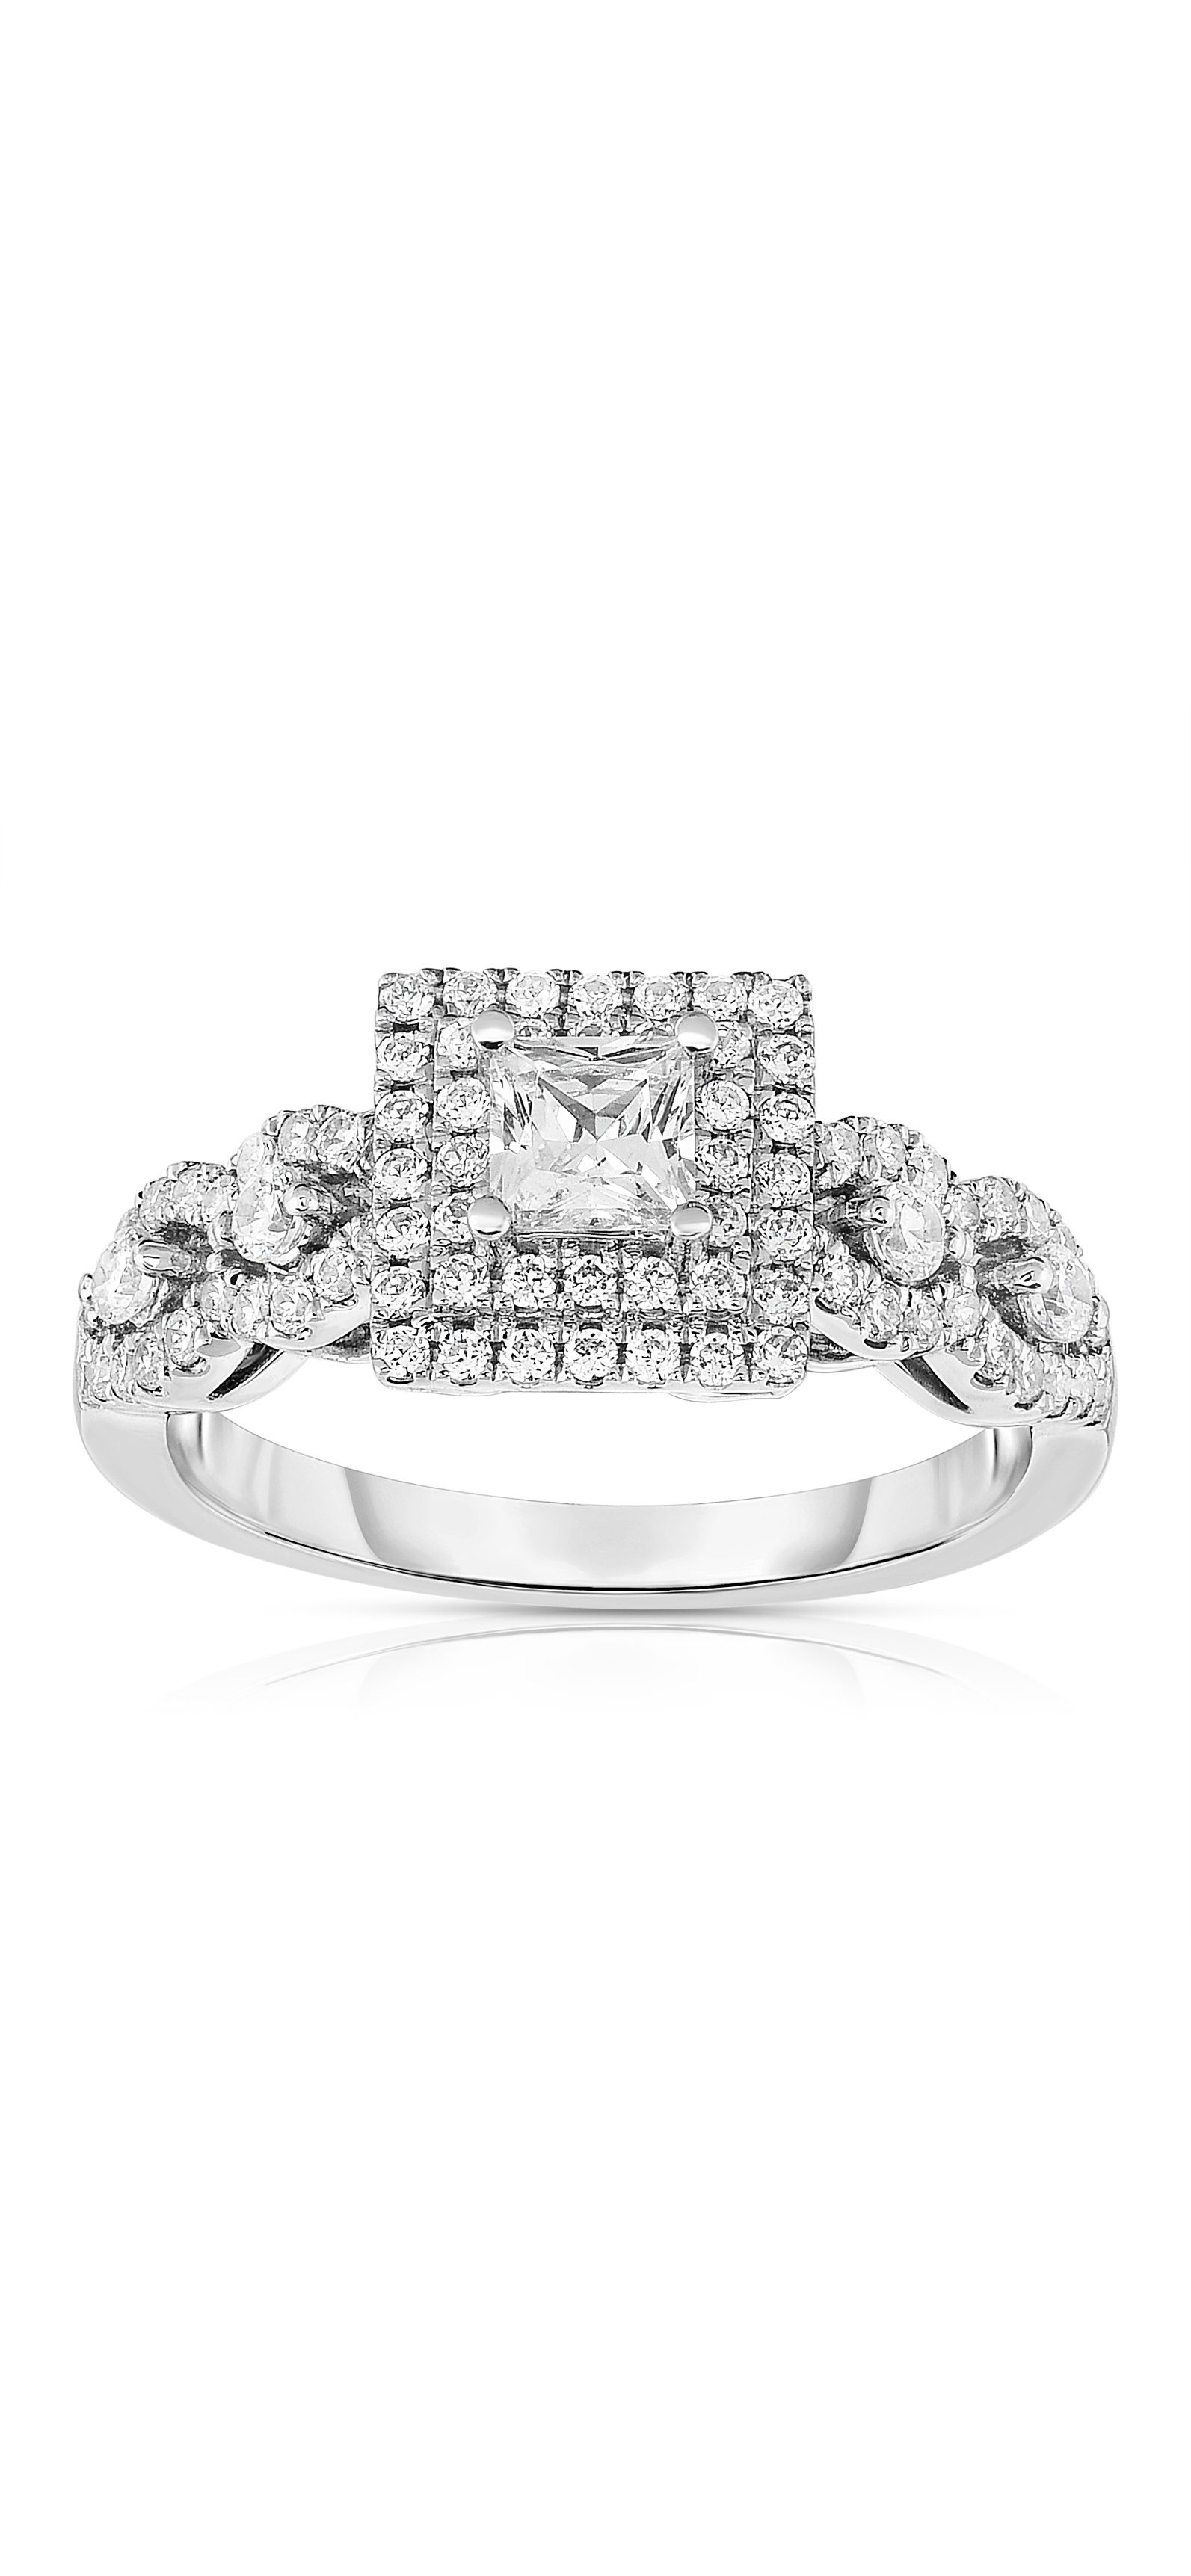 Diamond Engagement Ring Collection In Partnership With Zales Outlet Within Most Recent Diamond Double Frame Vintage Style Rings (Gallery 12 of 15)